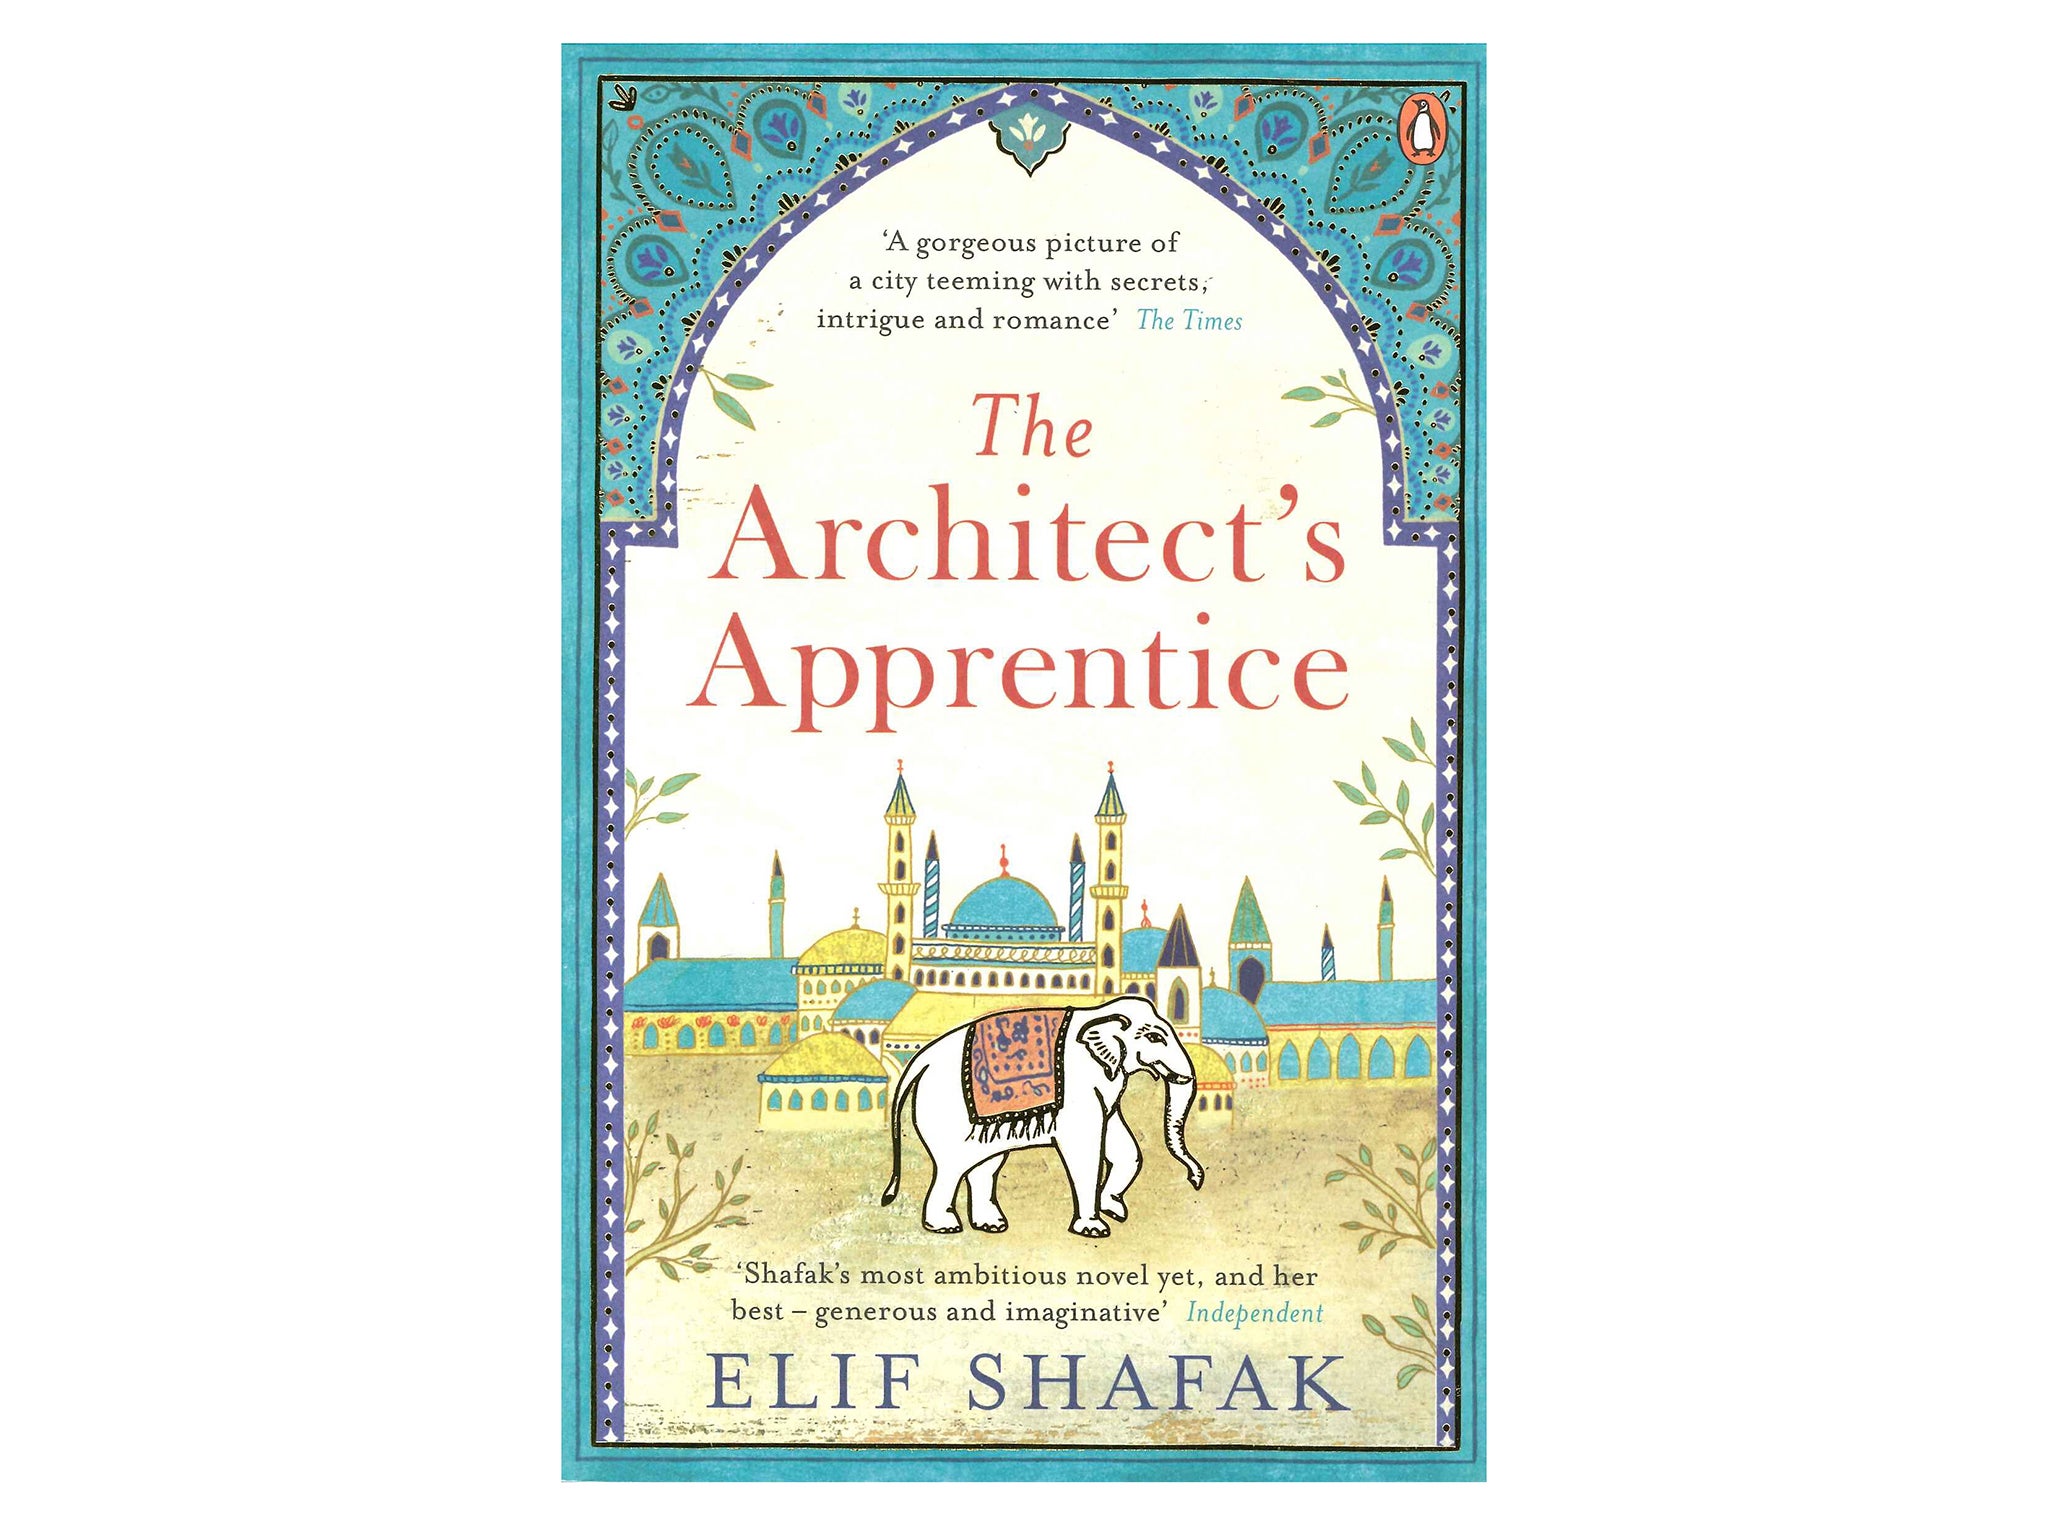 the-Architects-Apprentice-duchess-of-cornwall-book-club-indybest.jpg